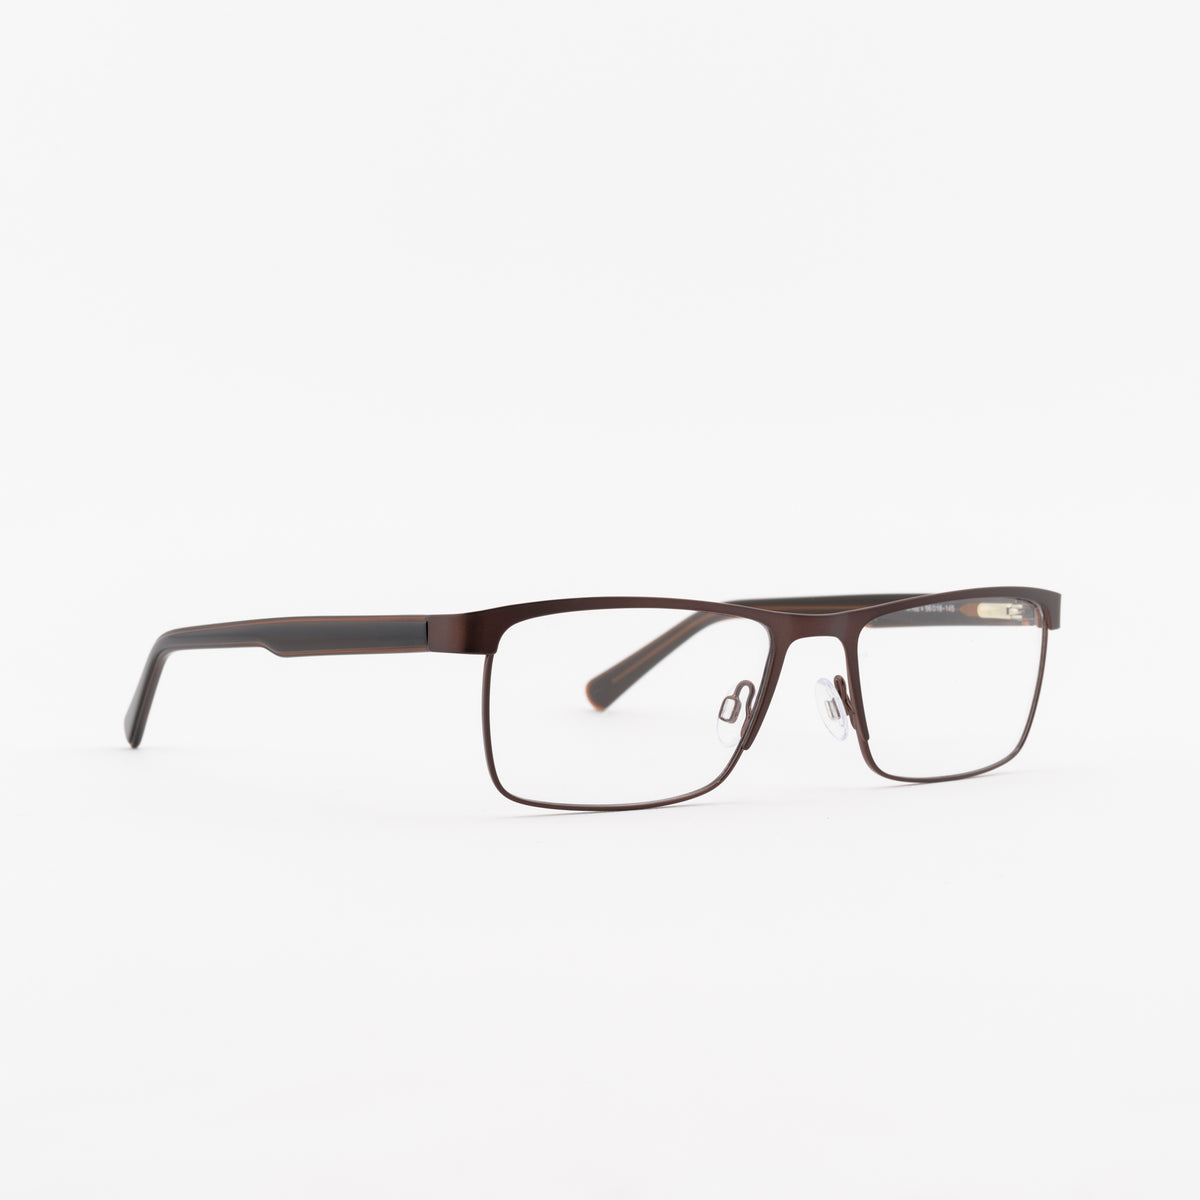 SF-534 Frames Superflex 56 M102 - BROWN Not Available